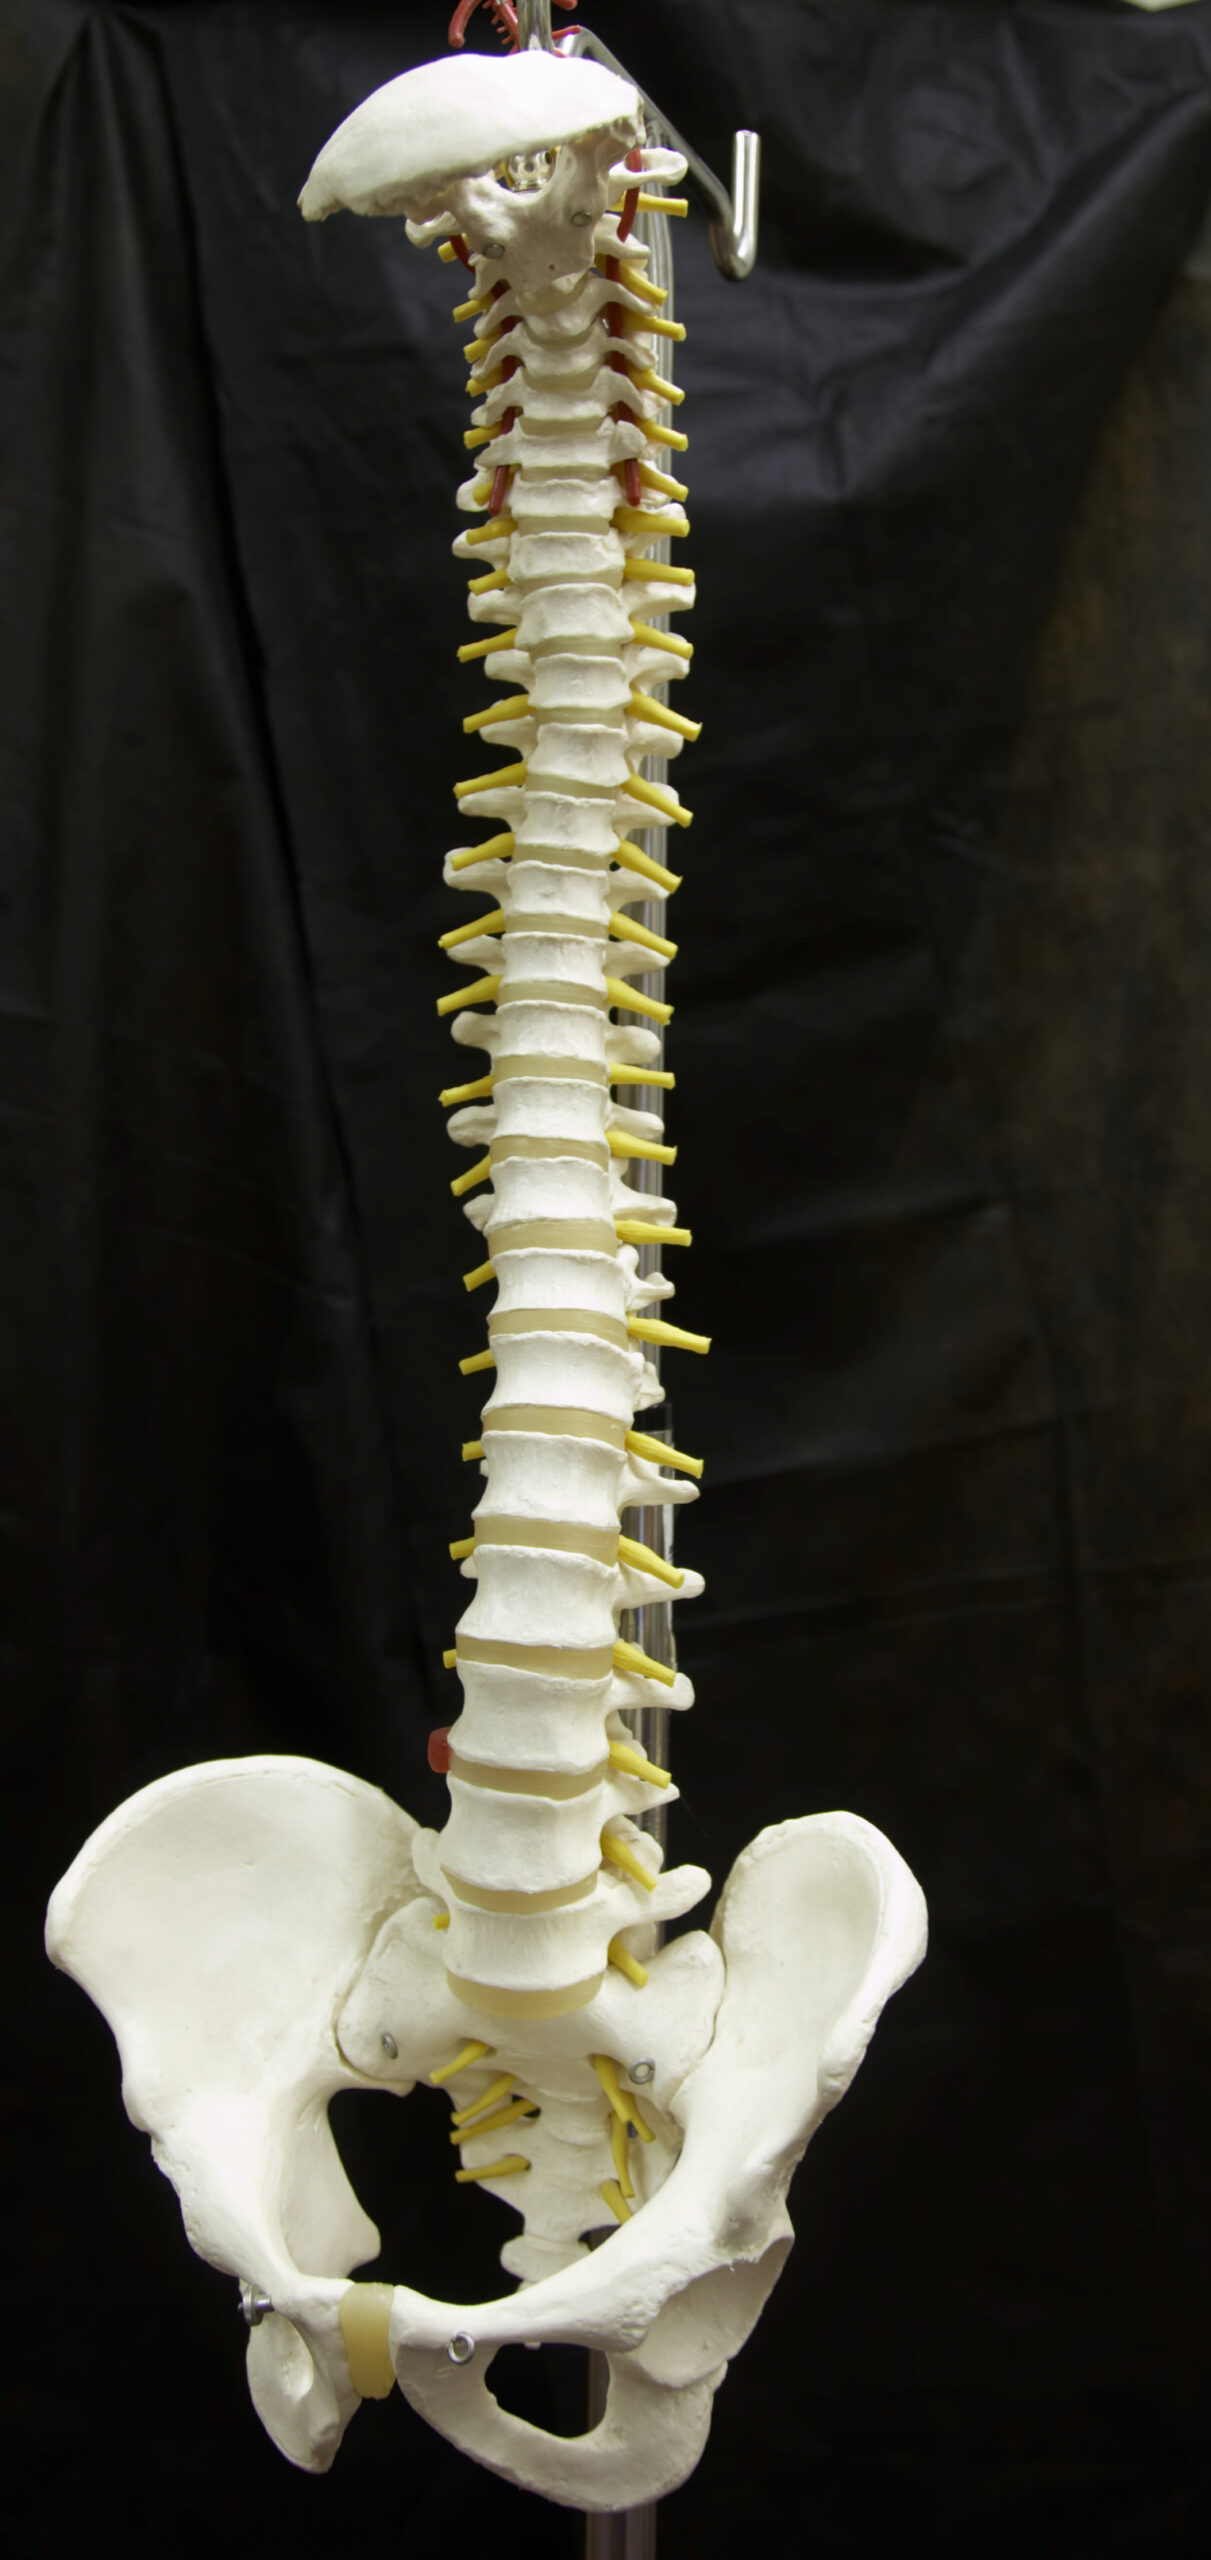 Medical model of spine shown to Little Elm TX patient